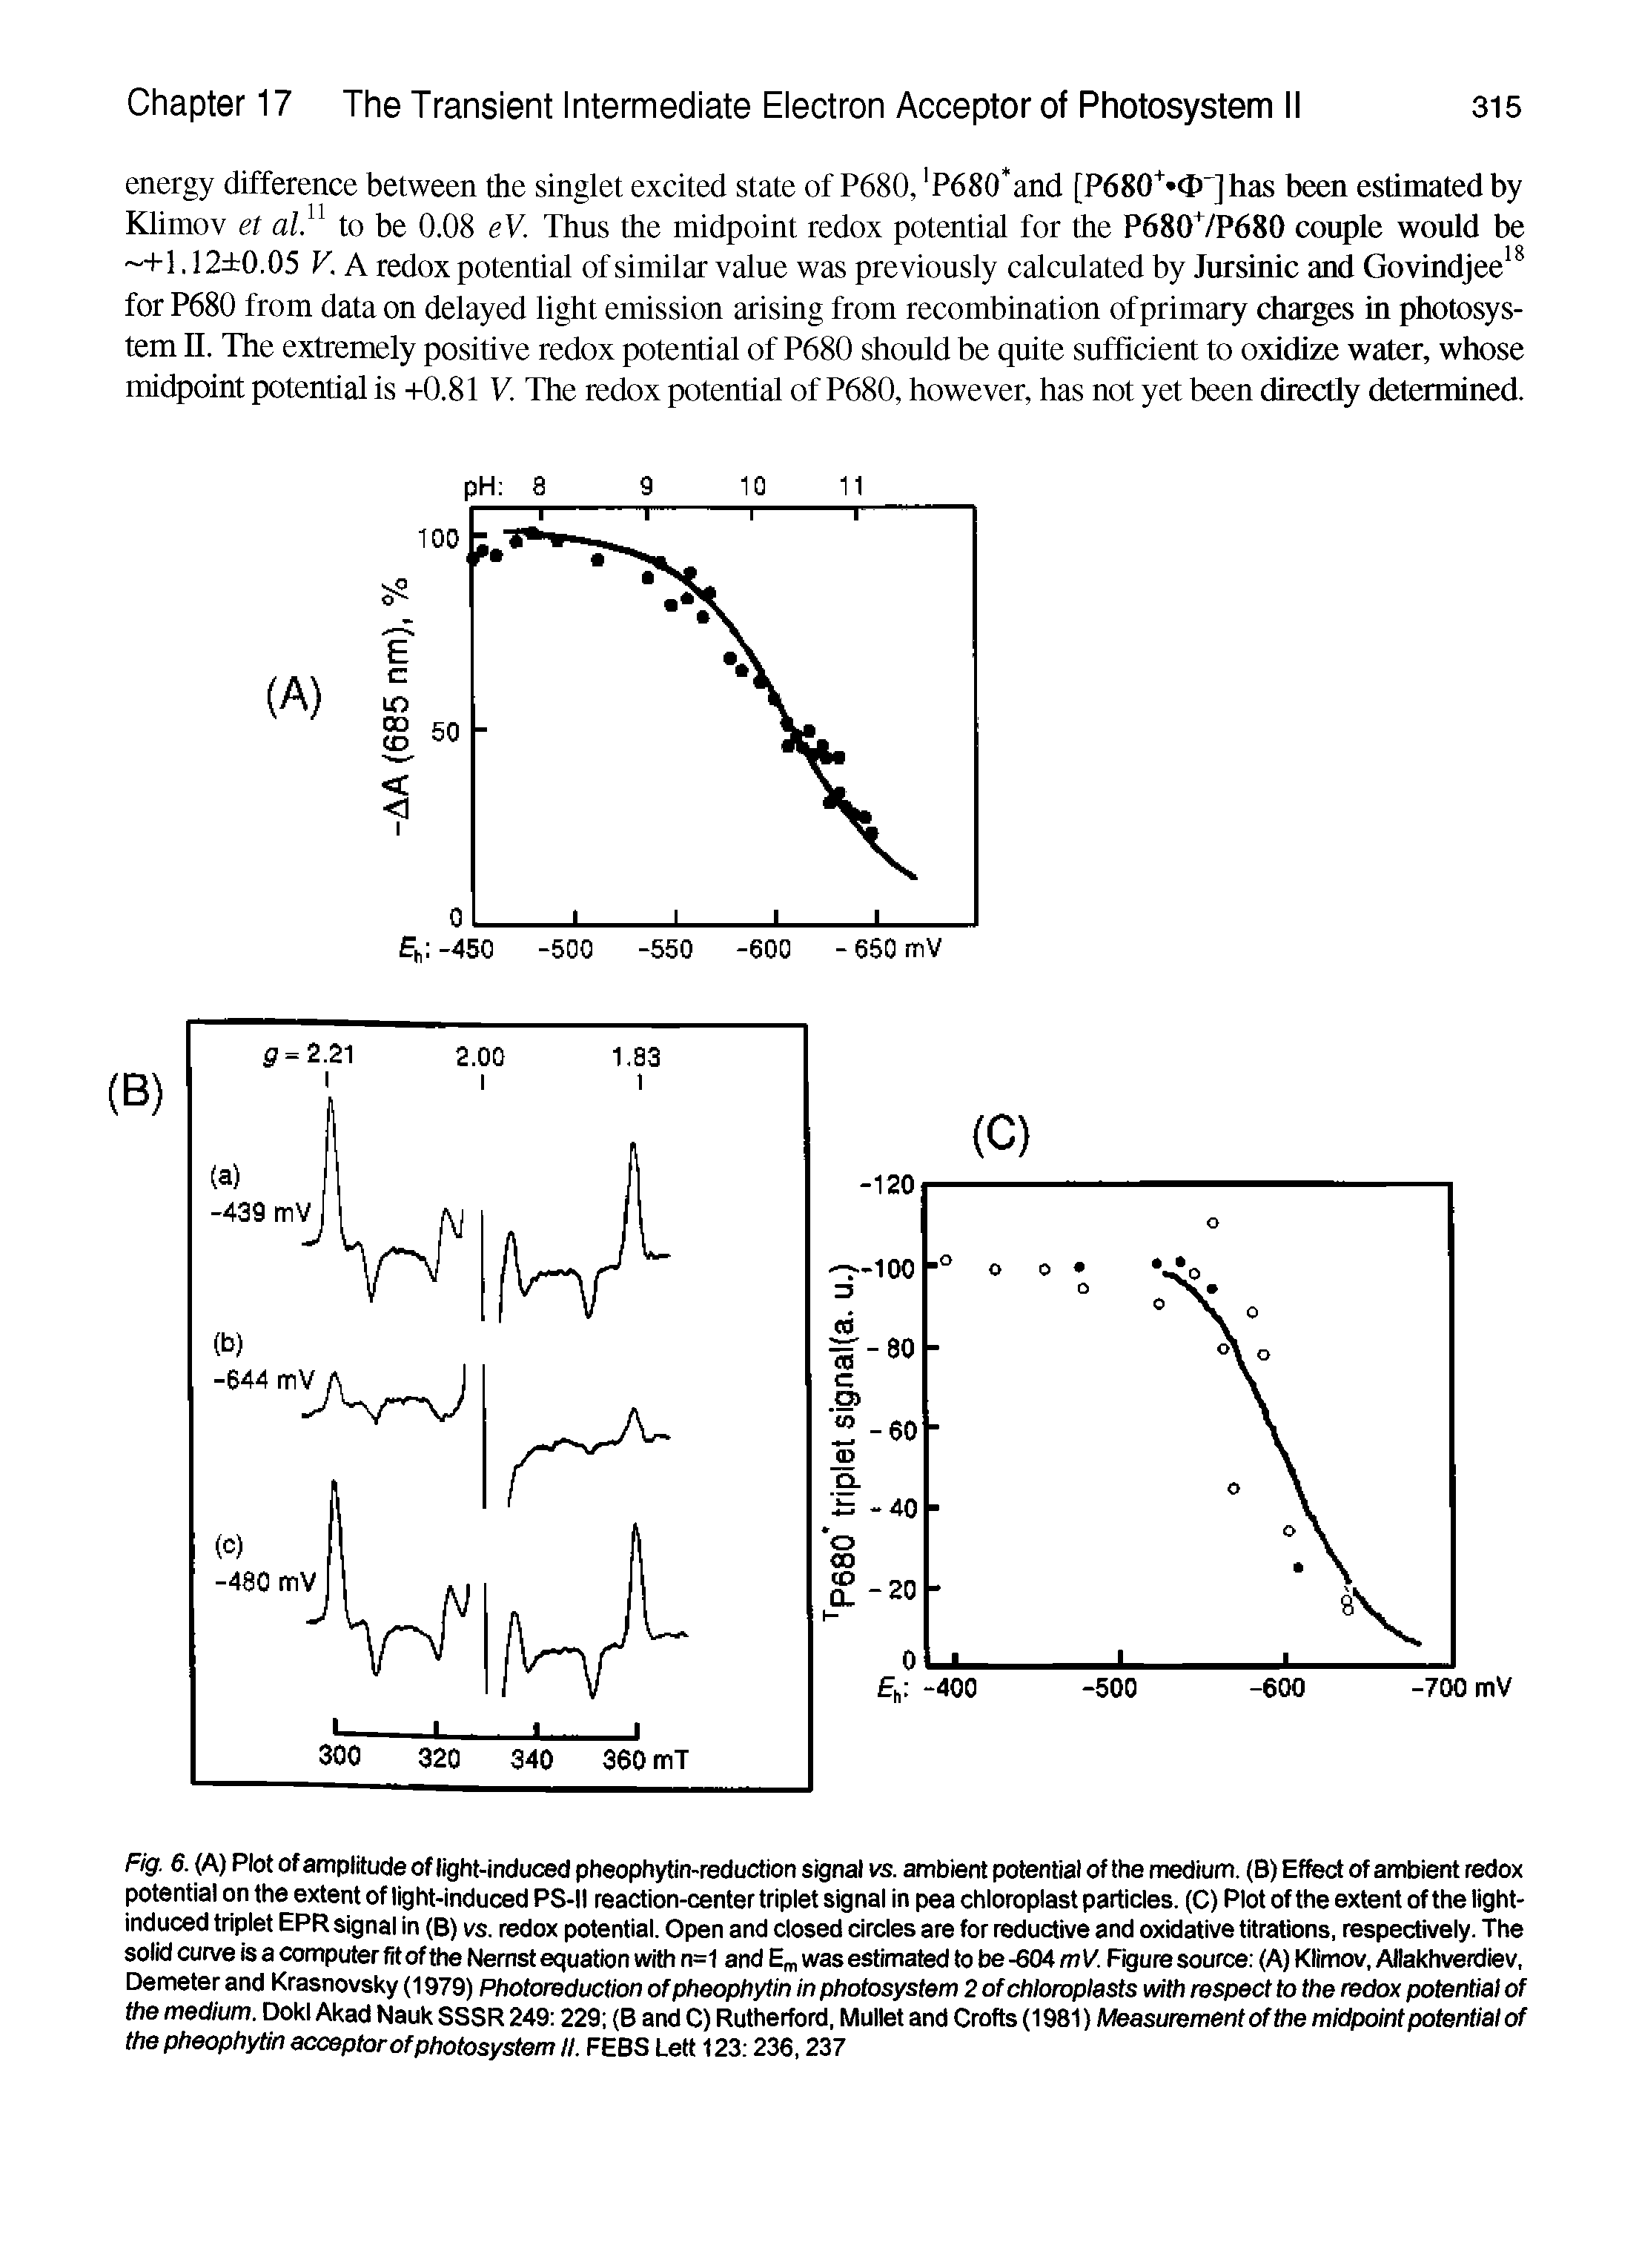 Fig. 6. (A) Plot of amplitude of light-induced pheophytin-reduction signal vs. ambient potential of the medium. (B) Effed of ambient redox potential on the extent of light-induced PS-II reaction-center triplet signal in pea chloroplast particles. (C) Plot of the extent of the light-induced triplet EPR signal in (B) vs. redox potential. Open and closed circles are for reductive and oxidative titrations, respedively. The solid curve is a computer fit of the Nernst equation with n=1 and E , was estimated to be -604 mV. Figure source (A) Klimov. Allakhverdiev. Demeter and Krasnovsky (1979) Photoreduction ofpheophytin in photosystem 2 ofchloroplasts with respect to the redox potential of the medium. DokI Akad NaukSSSR 249 229 (B and C) Rutherford, Mullet and Crofts (1981) Measurement of the midpoint potential of the pheophytin acceptor of photosystem II. FEBS Lett 123 236,237...